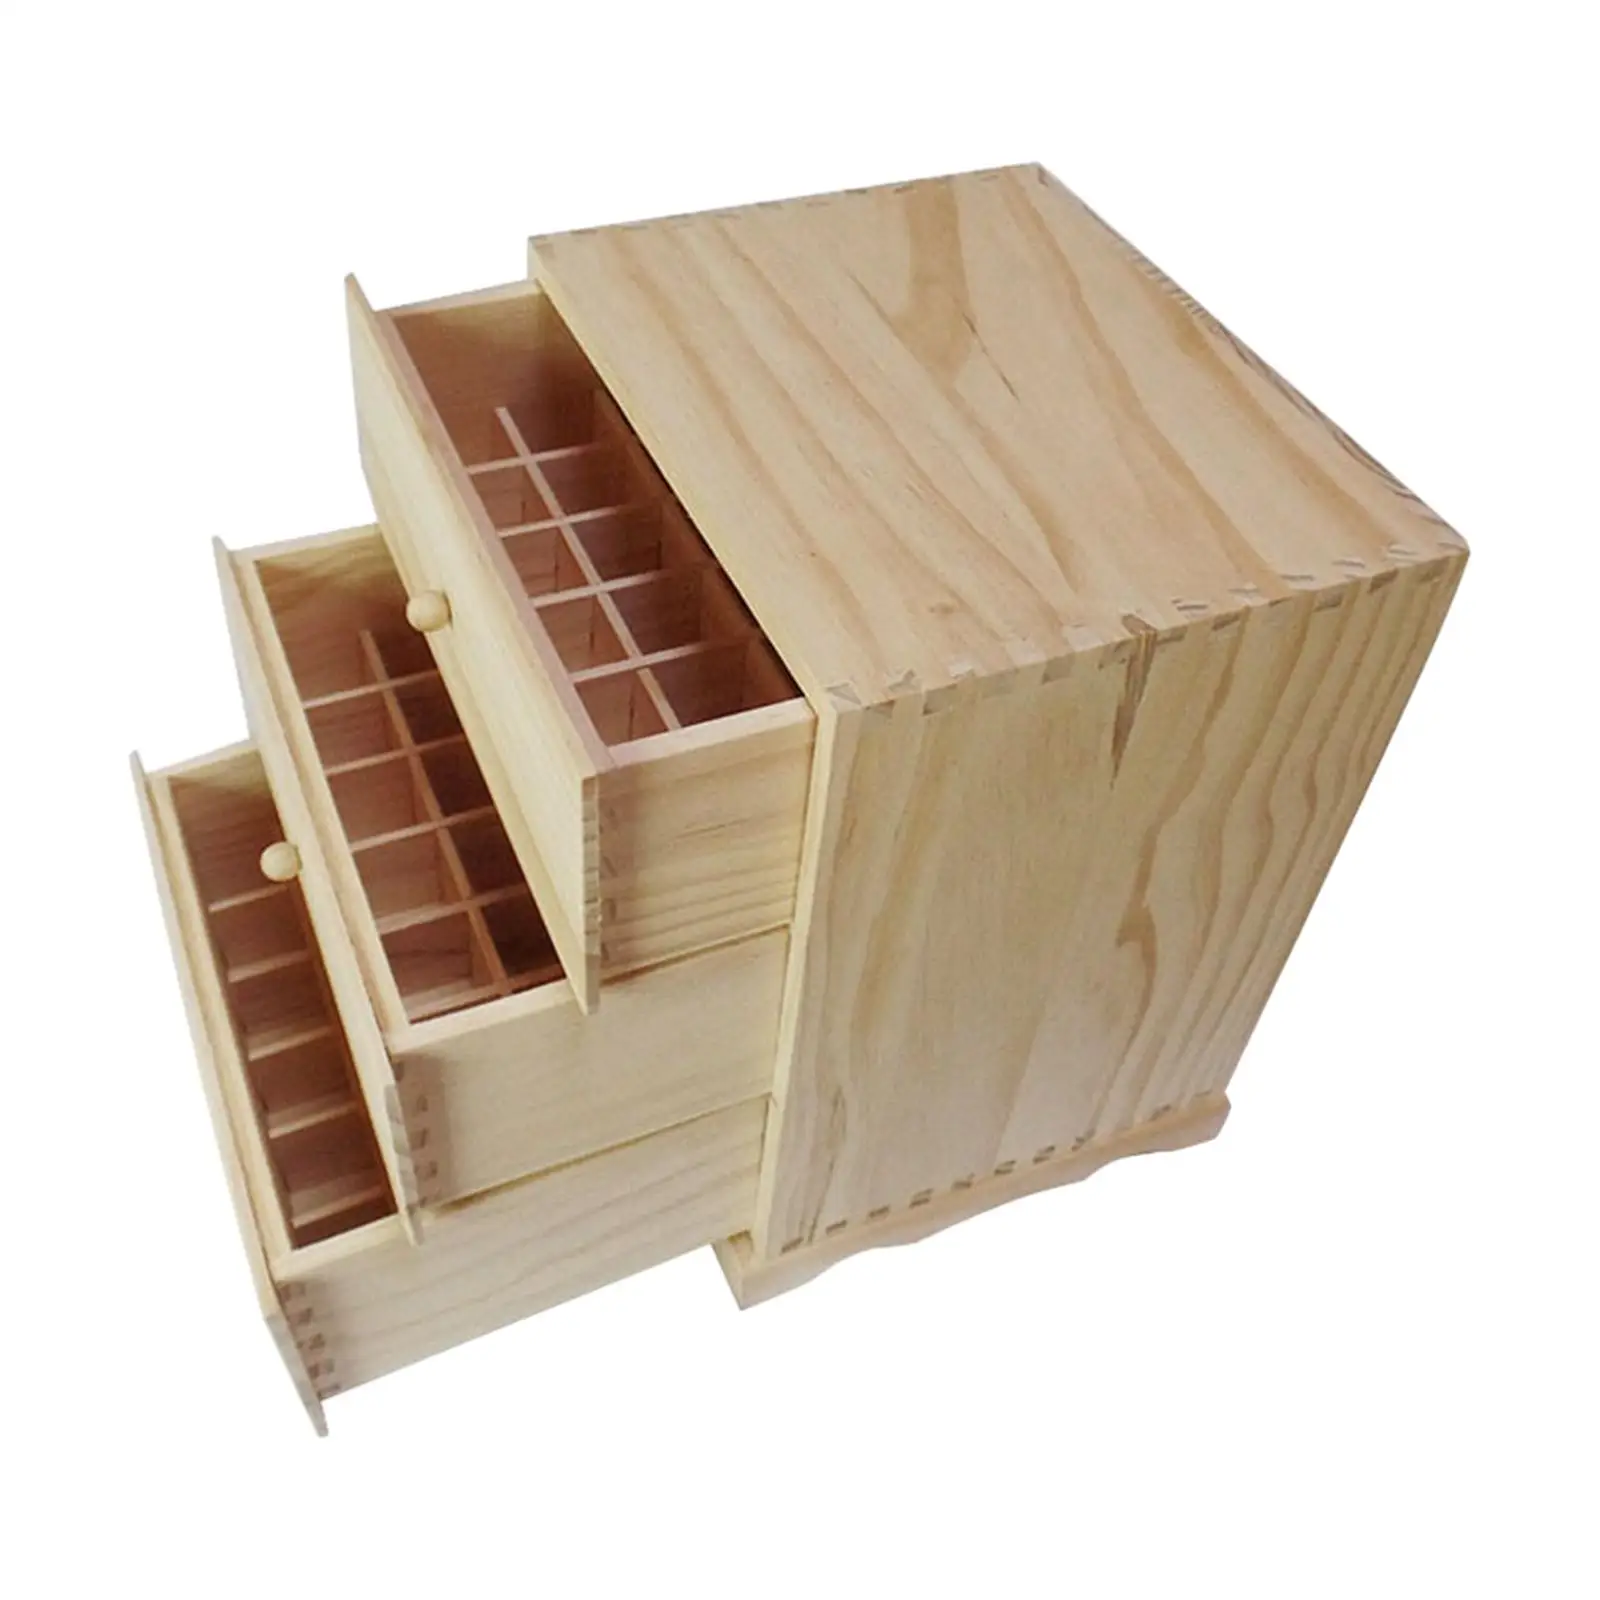 Essential Oil Storage Box Case Tier Height 7.5cm Space Saver Presentation 90 Slots Holder Protects Your Oils Display Wood Holder